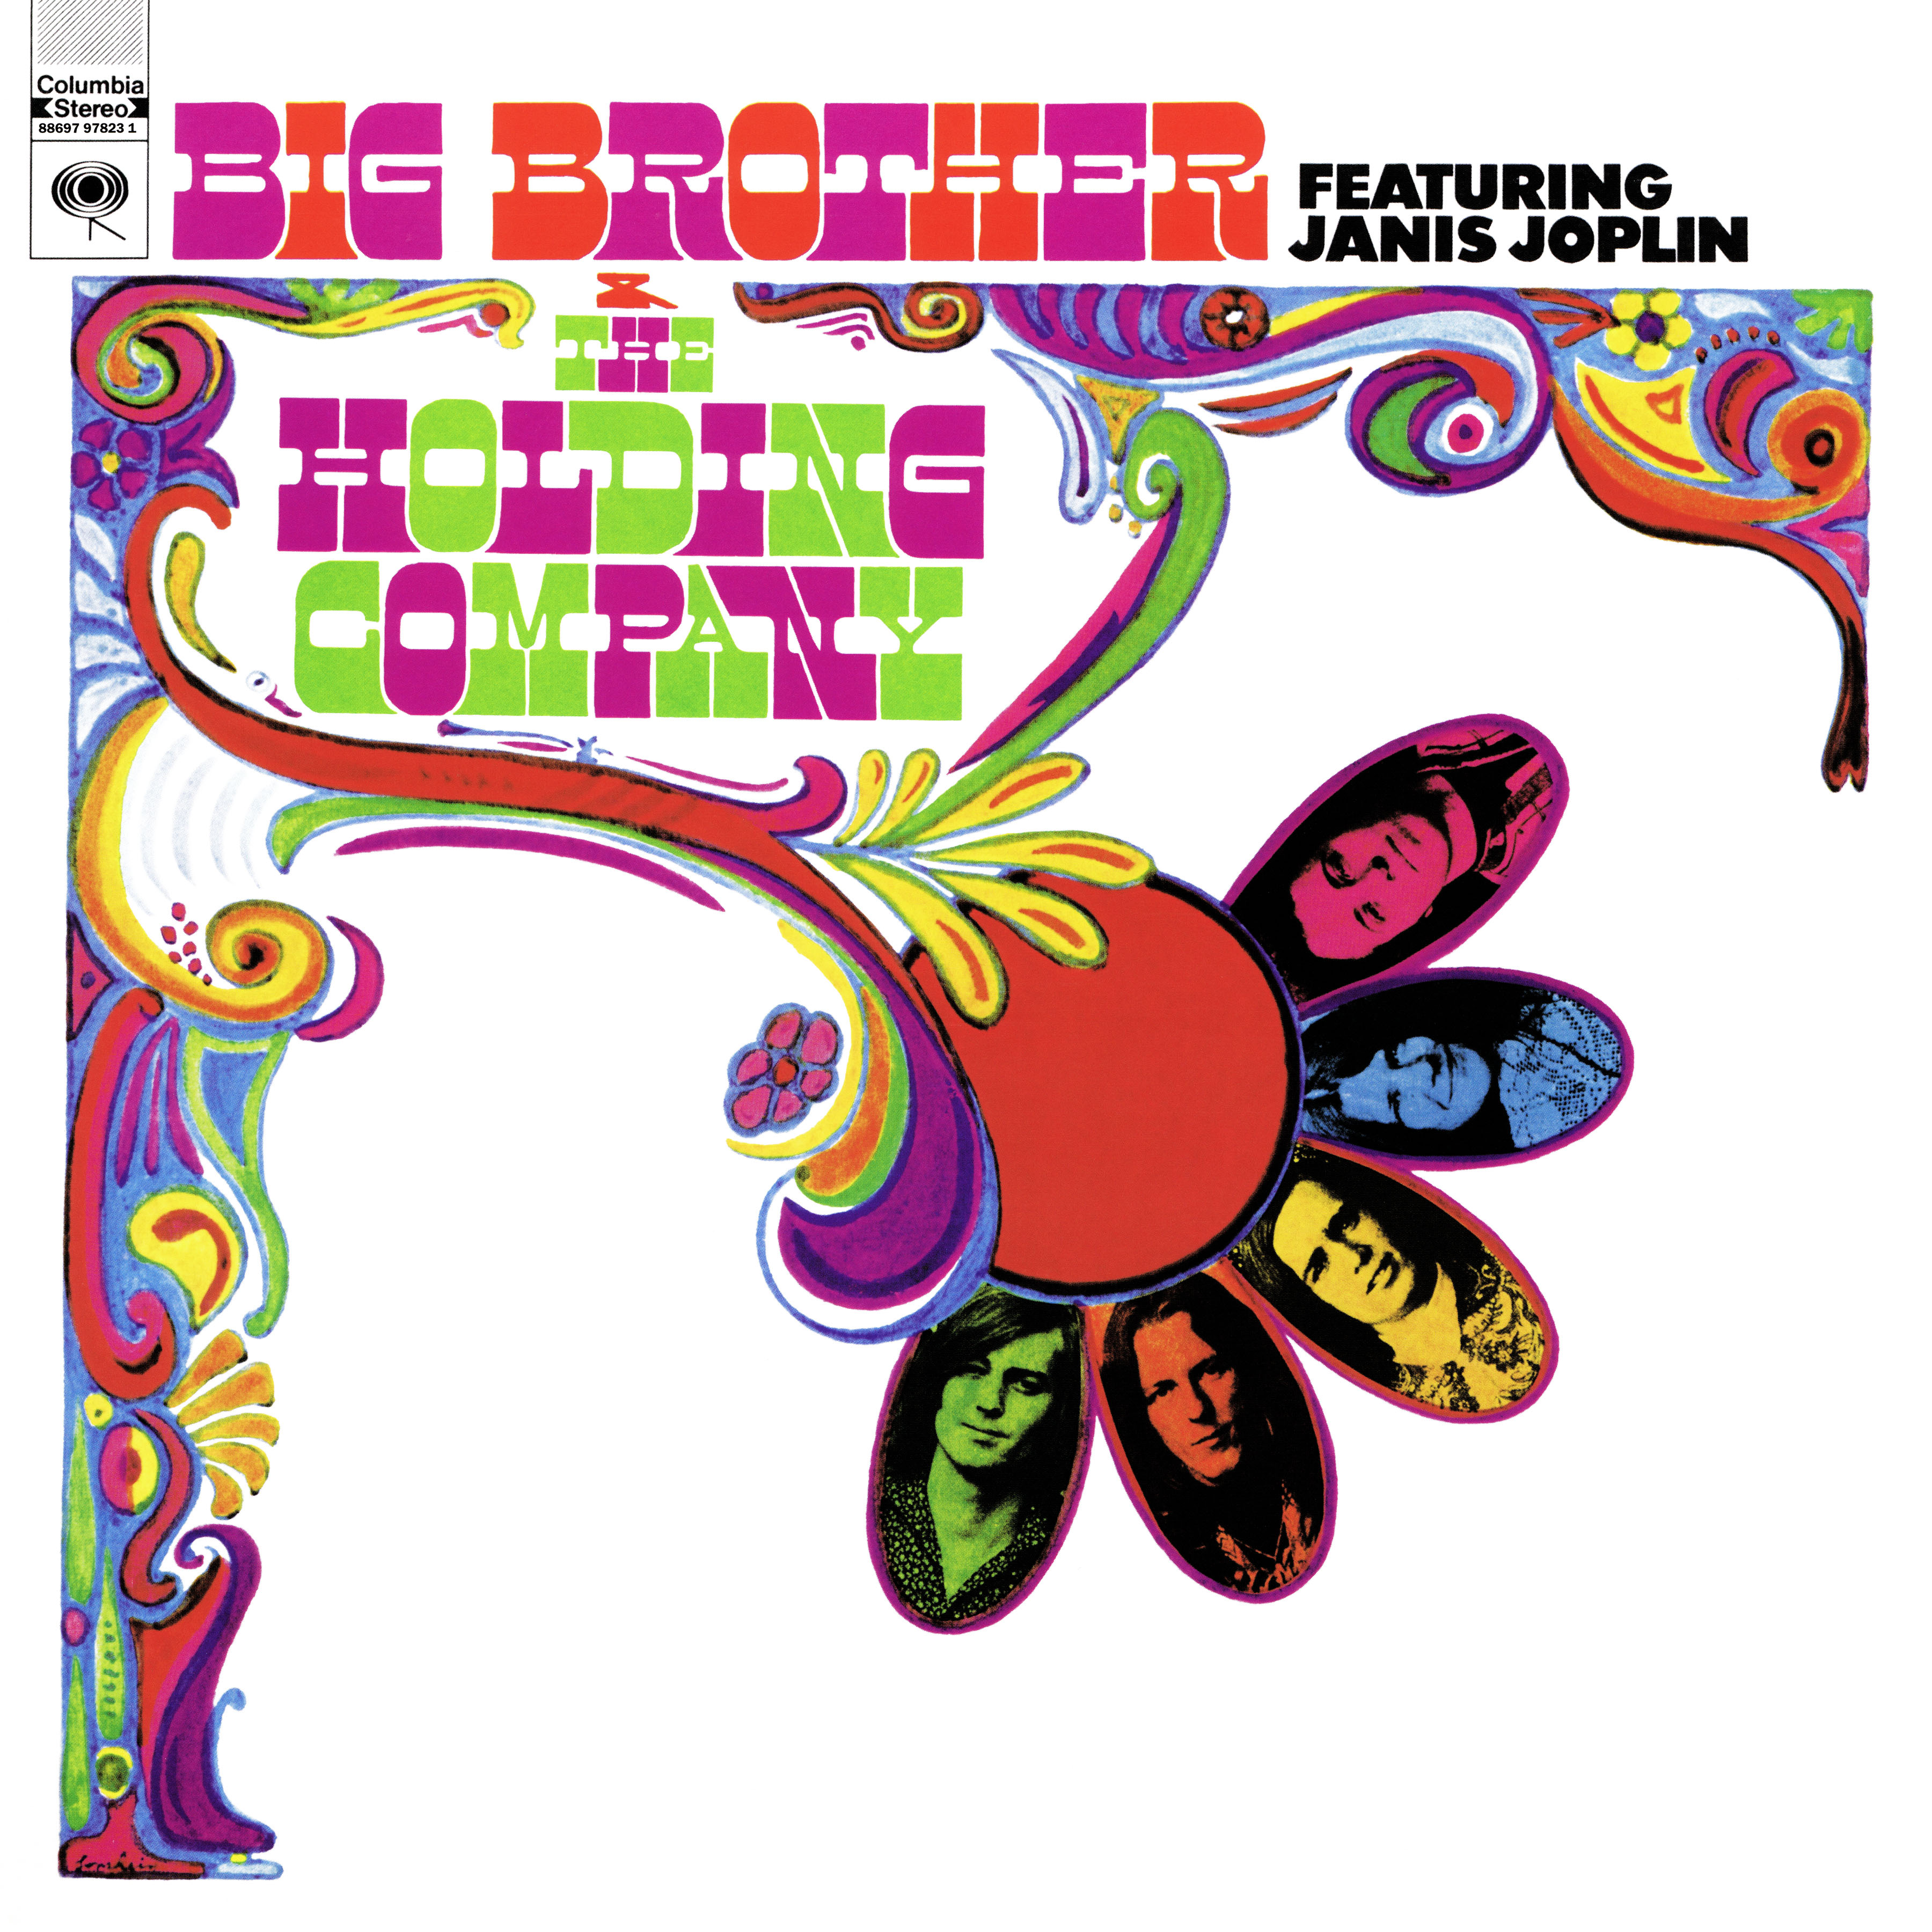 Art for Down On Me by Big Brother & the Holding Company